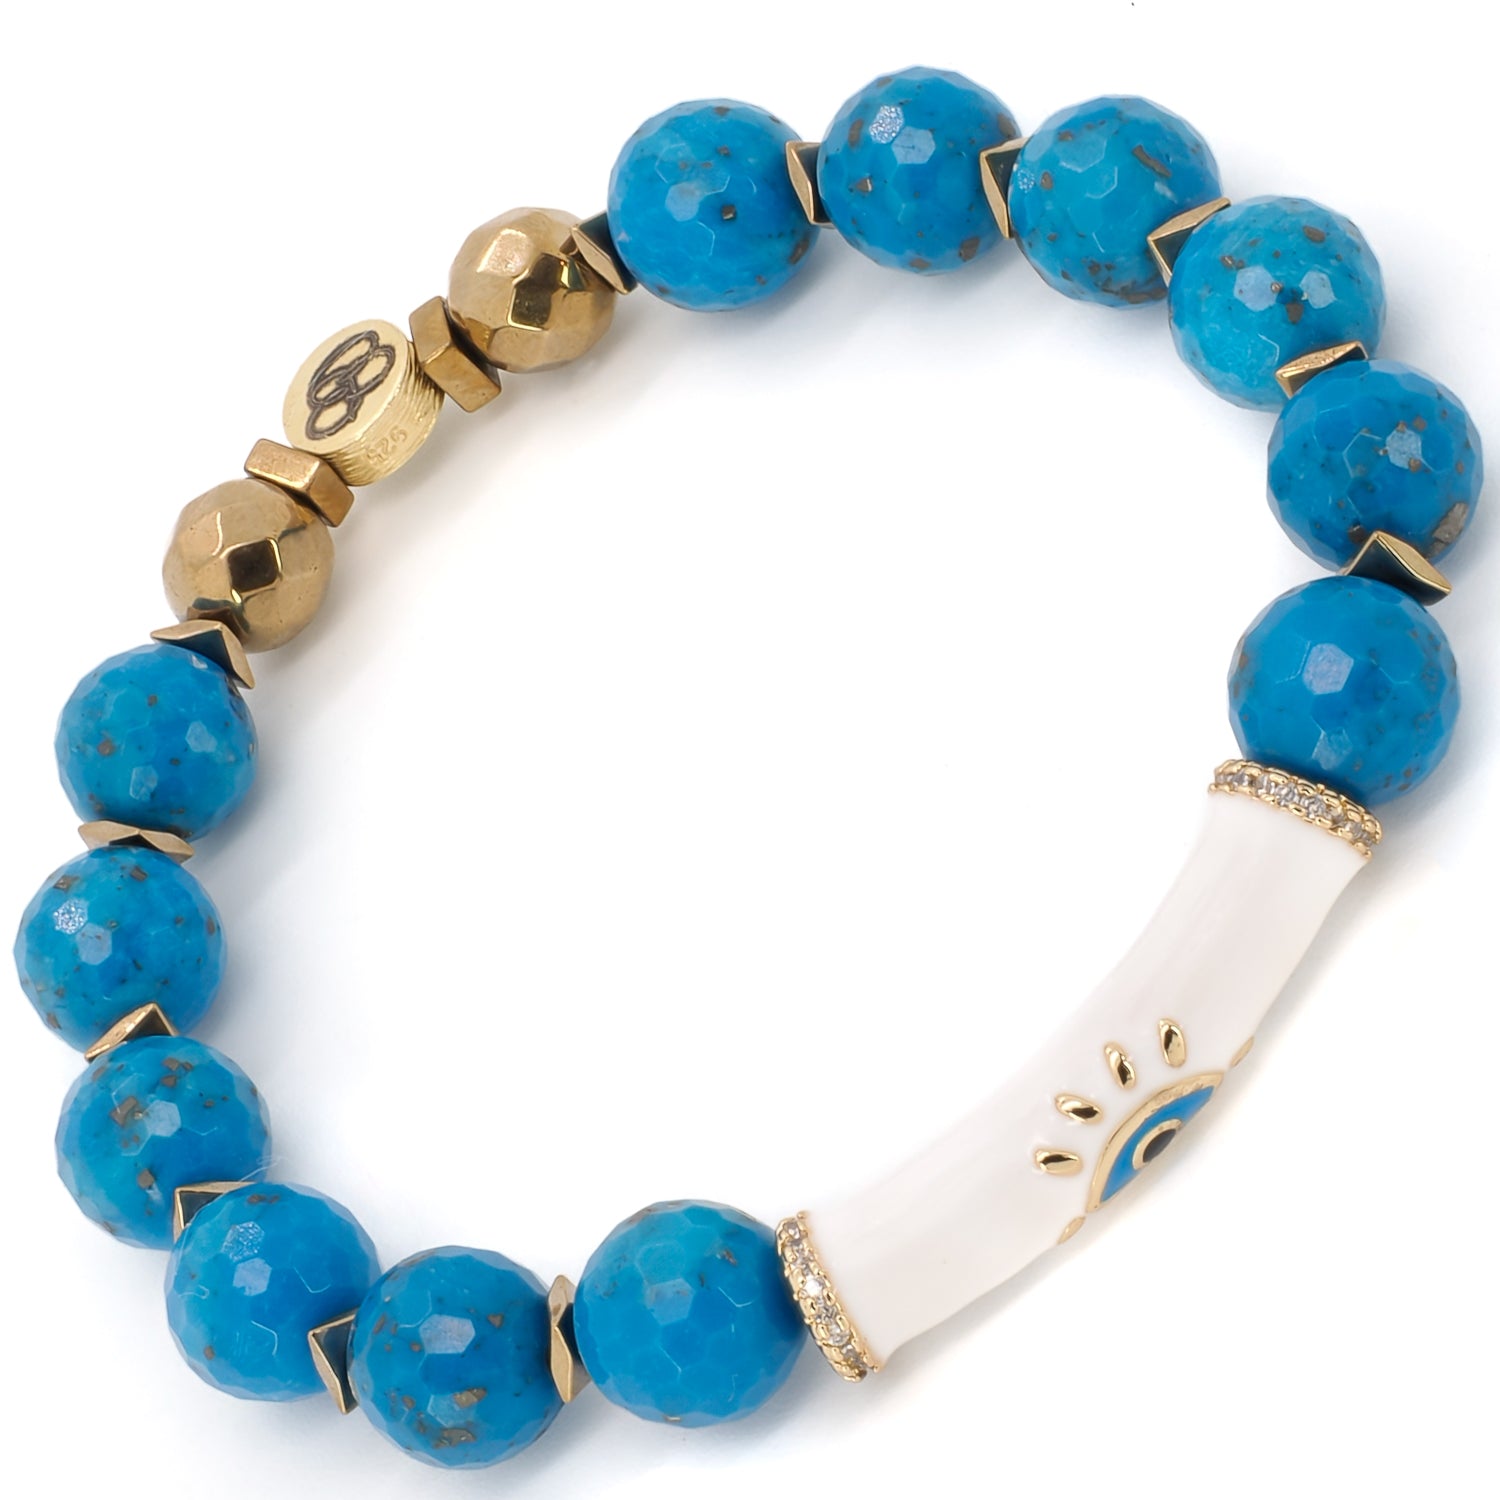 Experience the soothing energy of the Turquoise Inner Calm Bracelet, handcrafted with special faceted turquoise stones and gold hematite spacers.